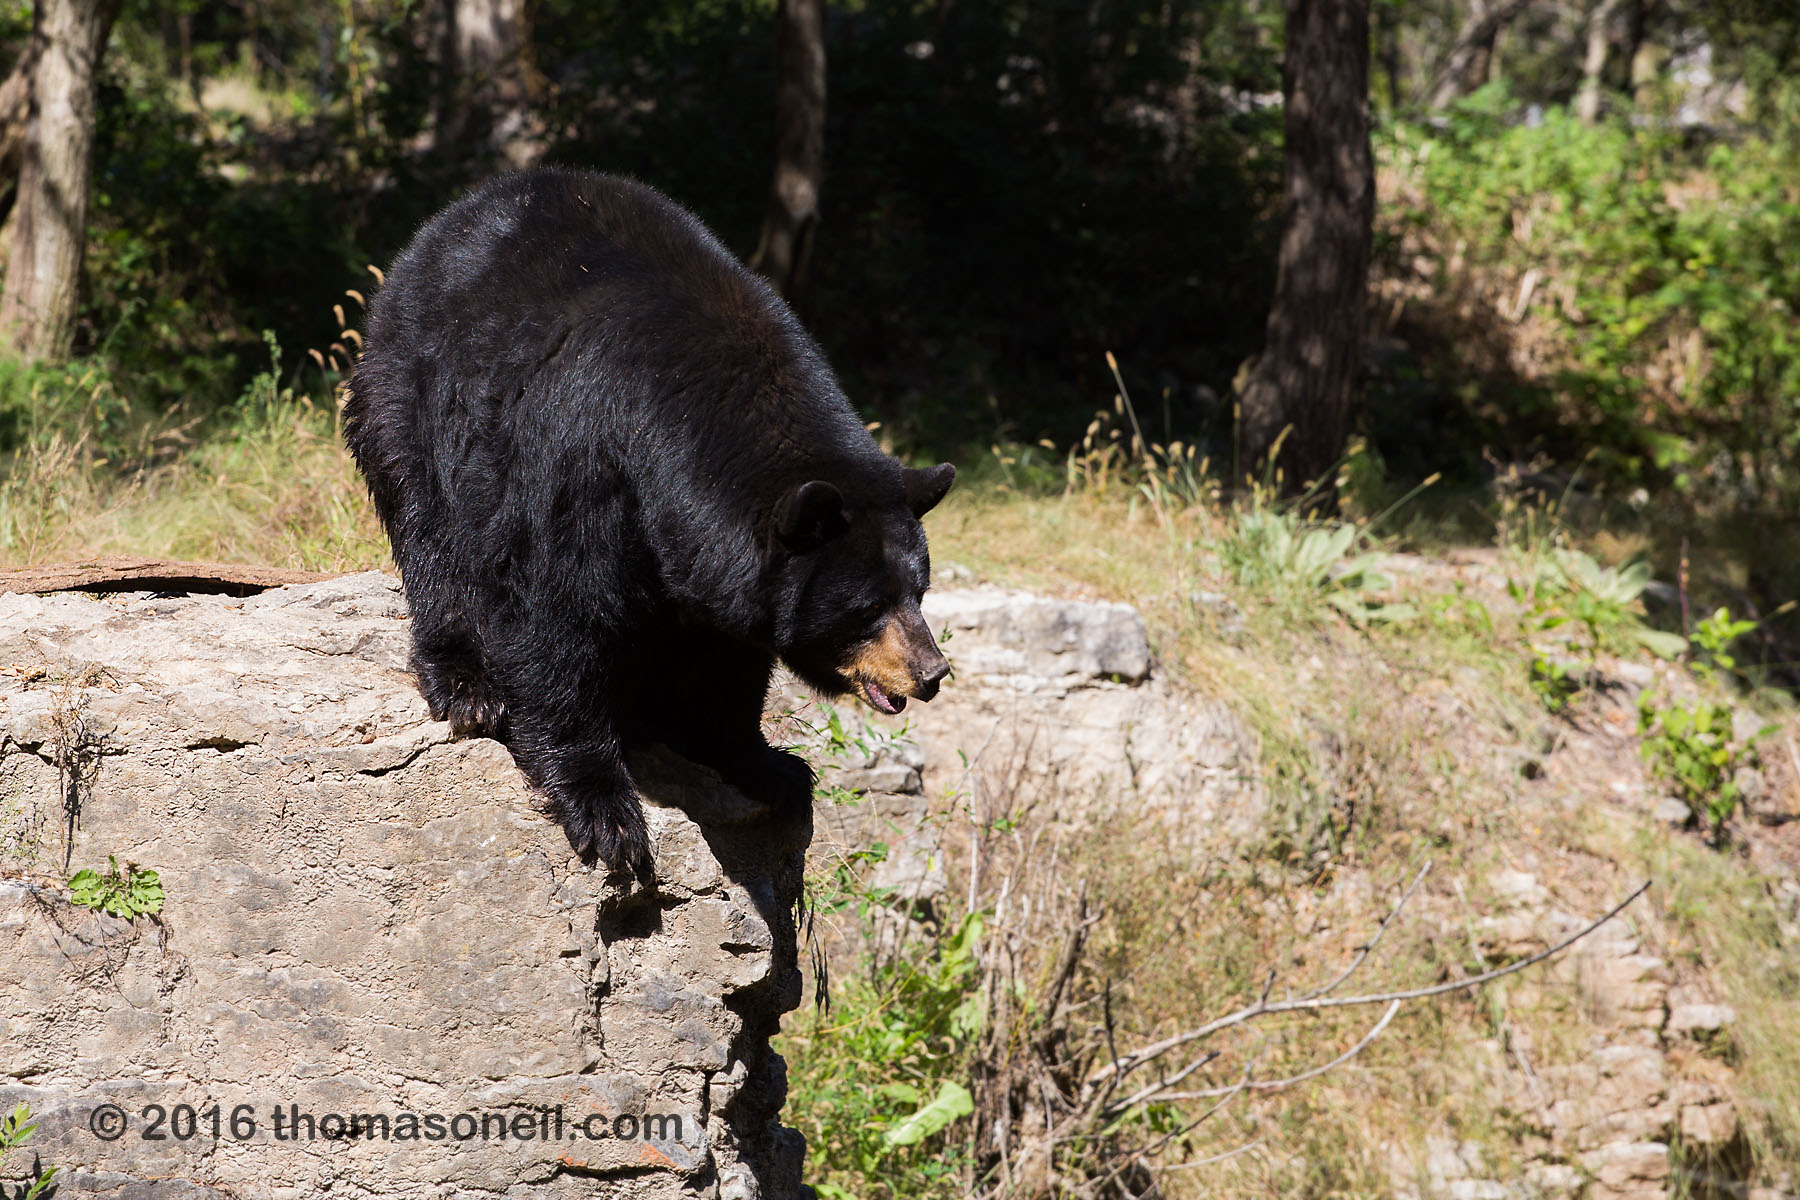 Black bear, Lee G. Simmons Conservation Park and Wildlife Safari.  Click for next photo.